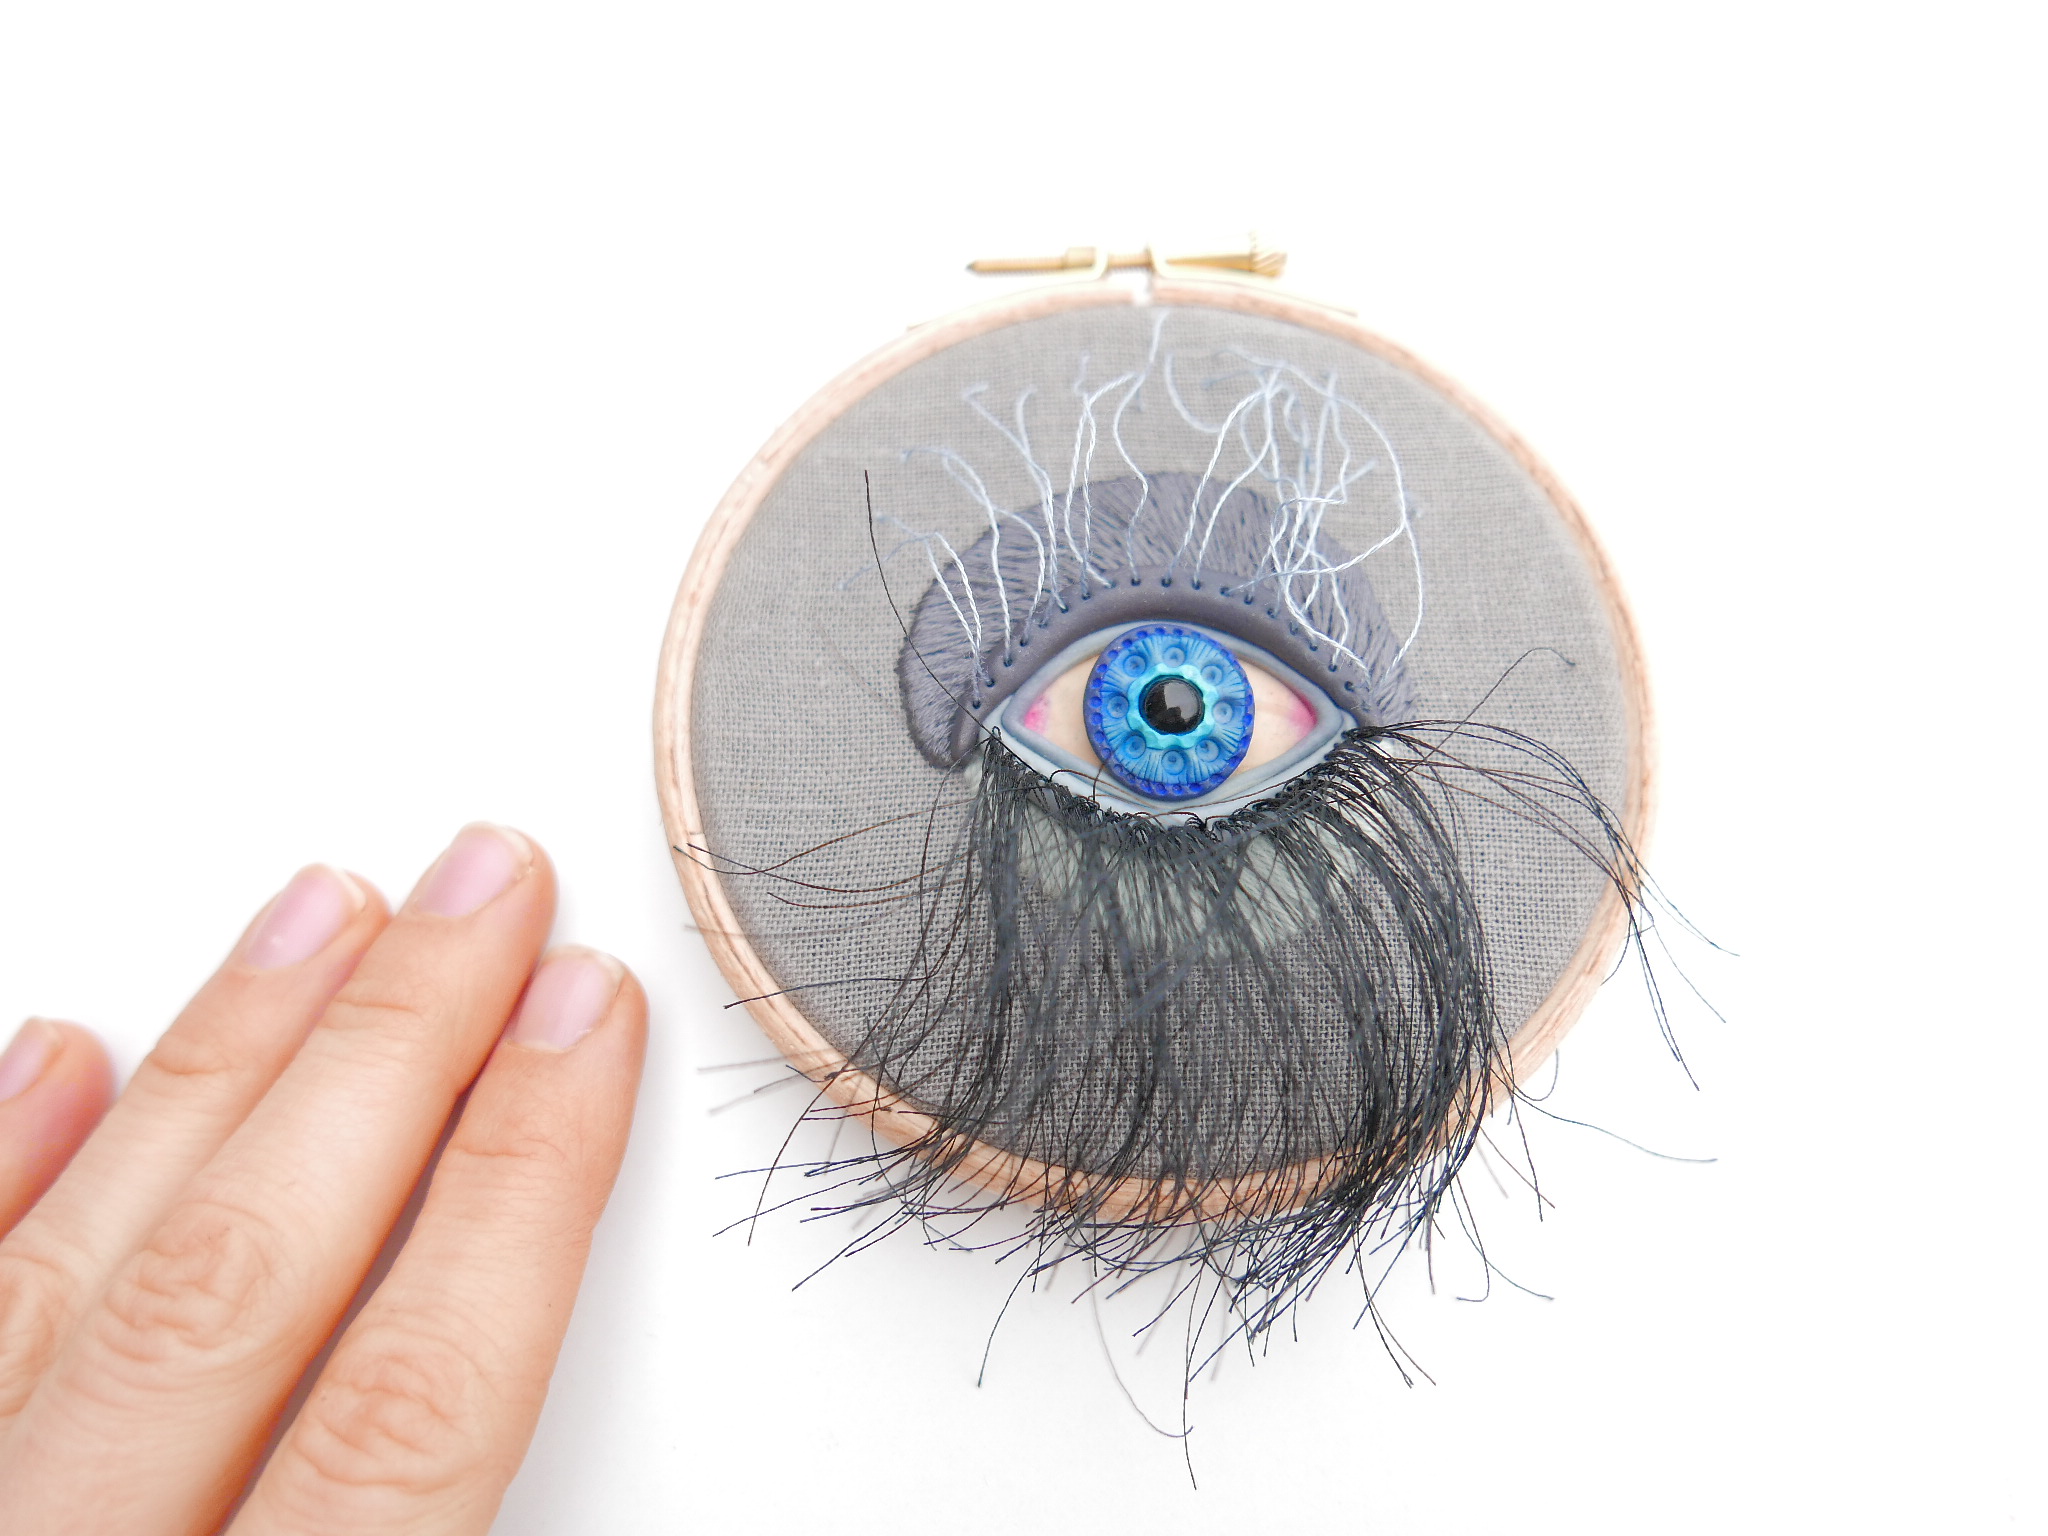 mixed media embroidery